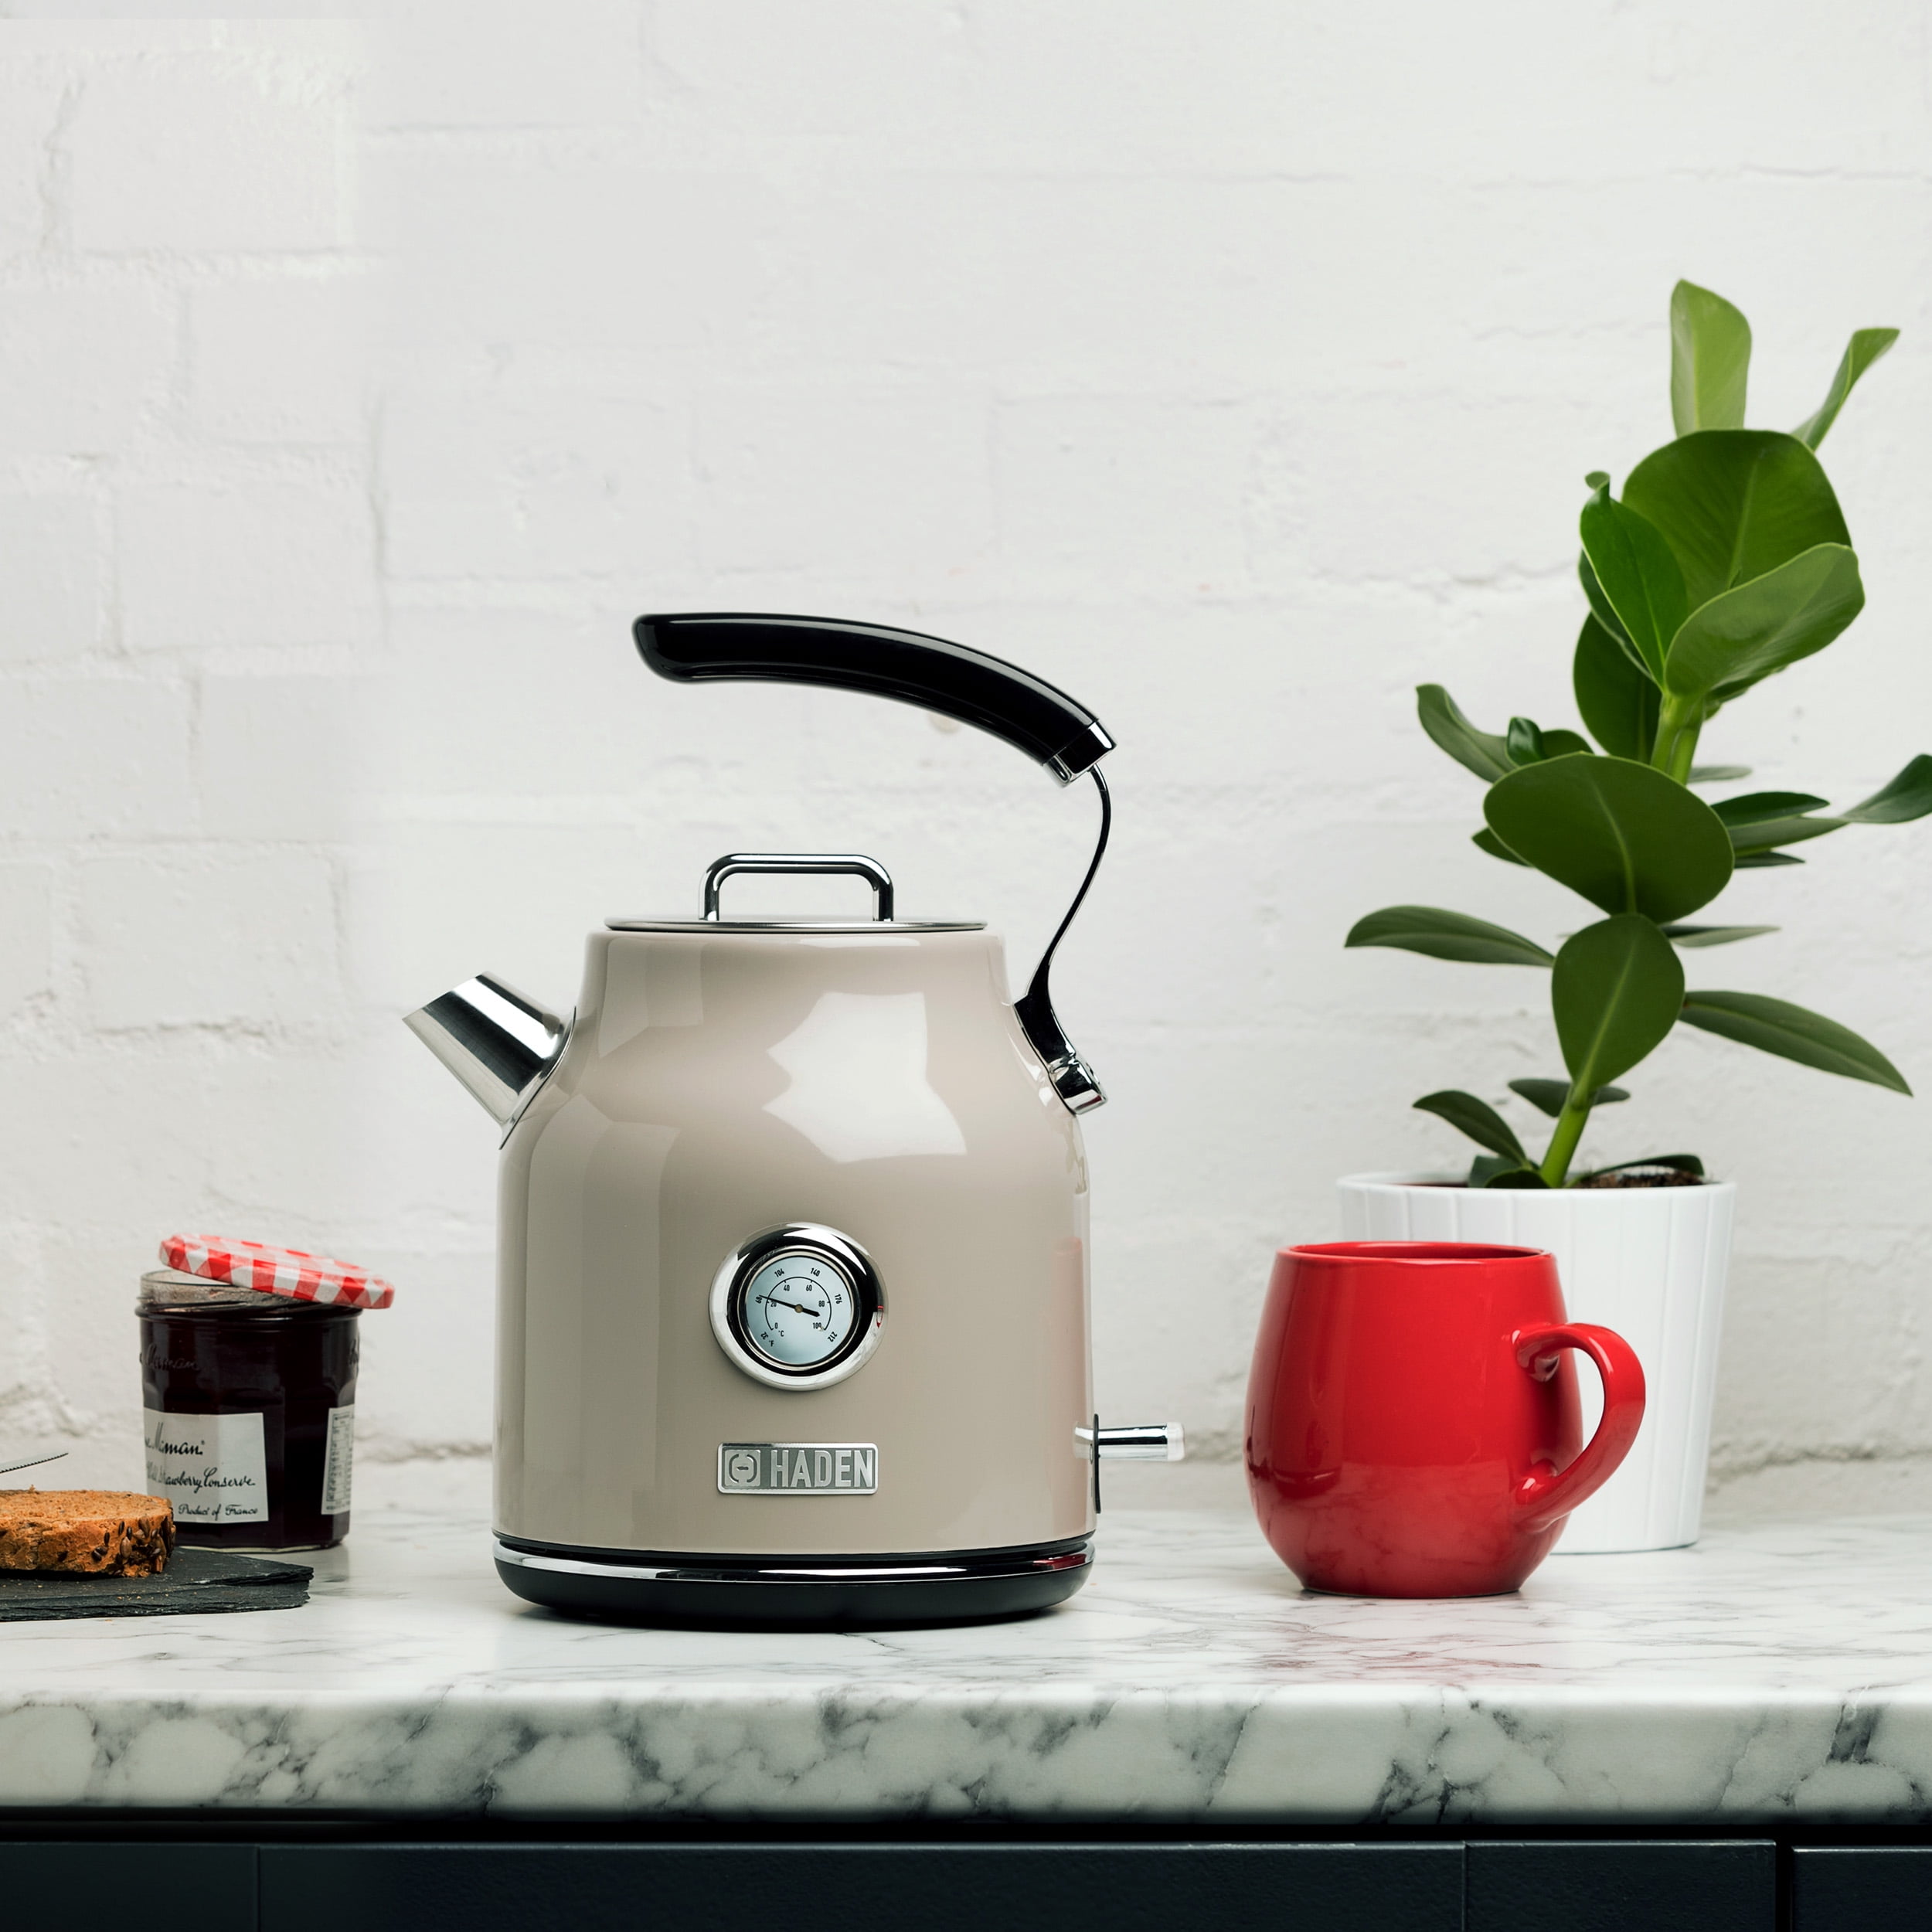 Haden Dorset 1.7L Stainless Steel Electric Kettle - Putty